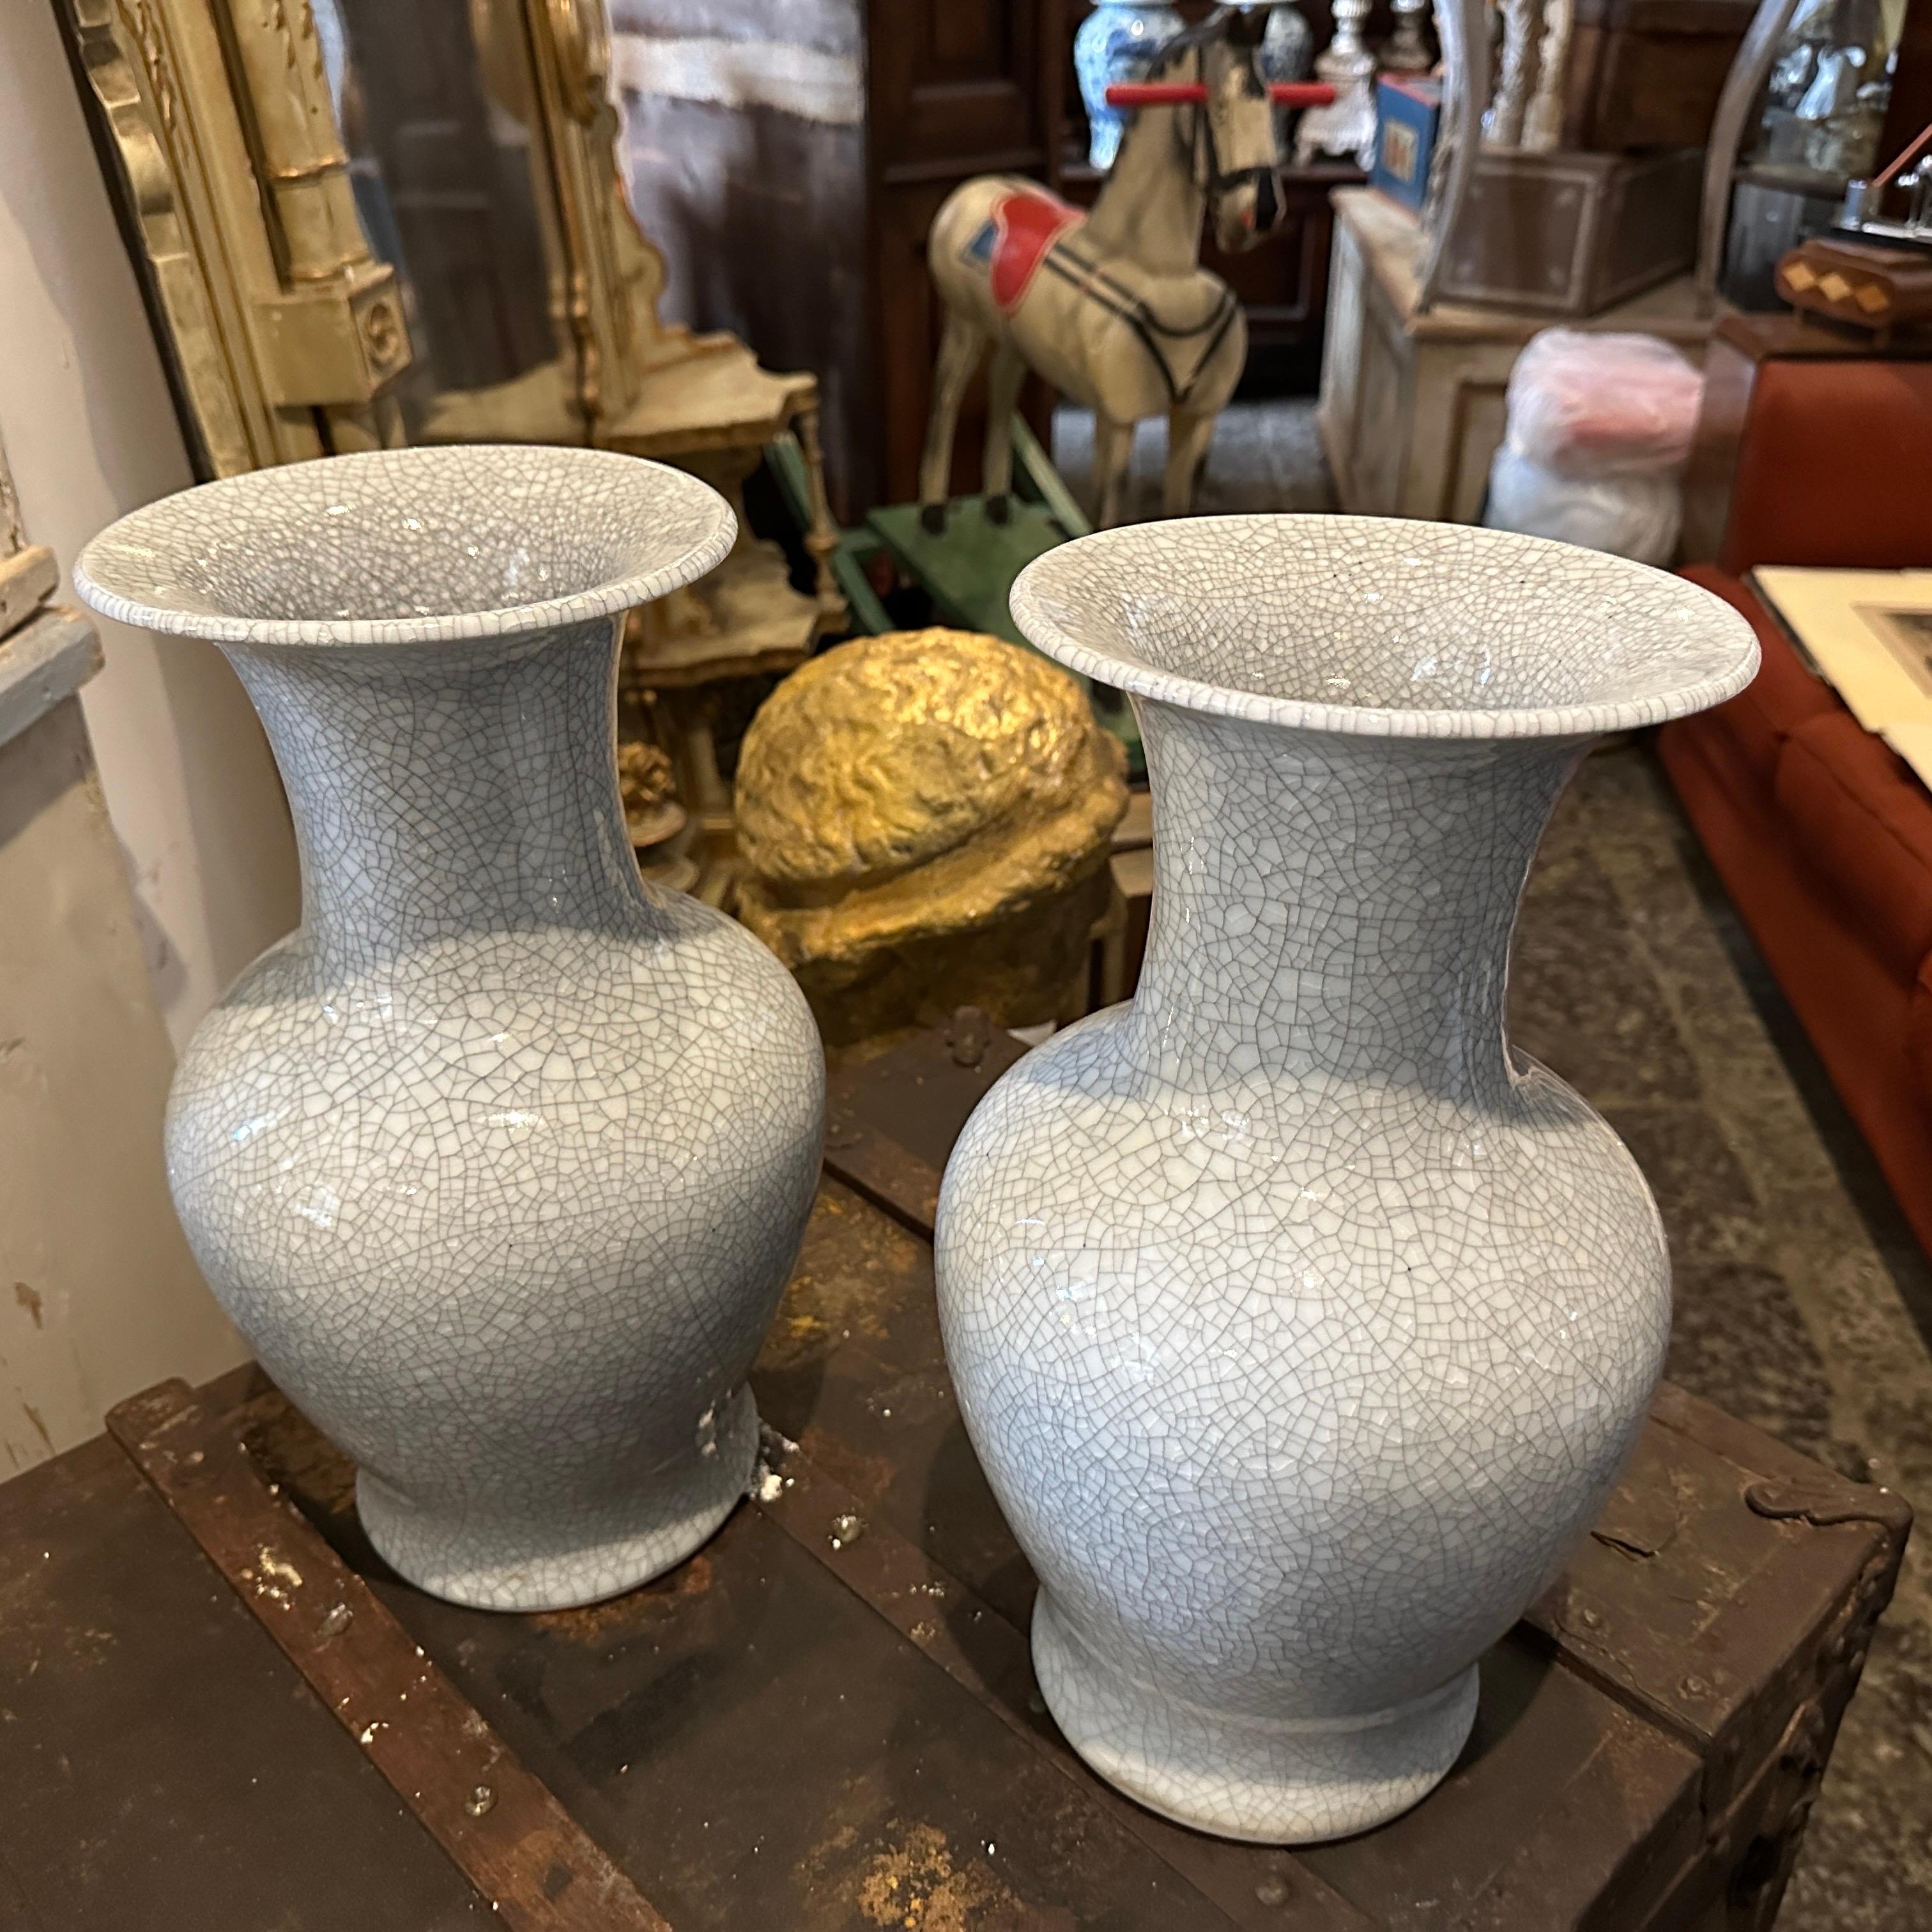 A pair of simple and elegant well shaped Celadon vases manufactured in China in the Mid-20th Century, the vases are covered overall with a crackled grey celadon glaze. The glaze it's smooth and even, with a slight sheen that catches the light.